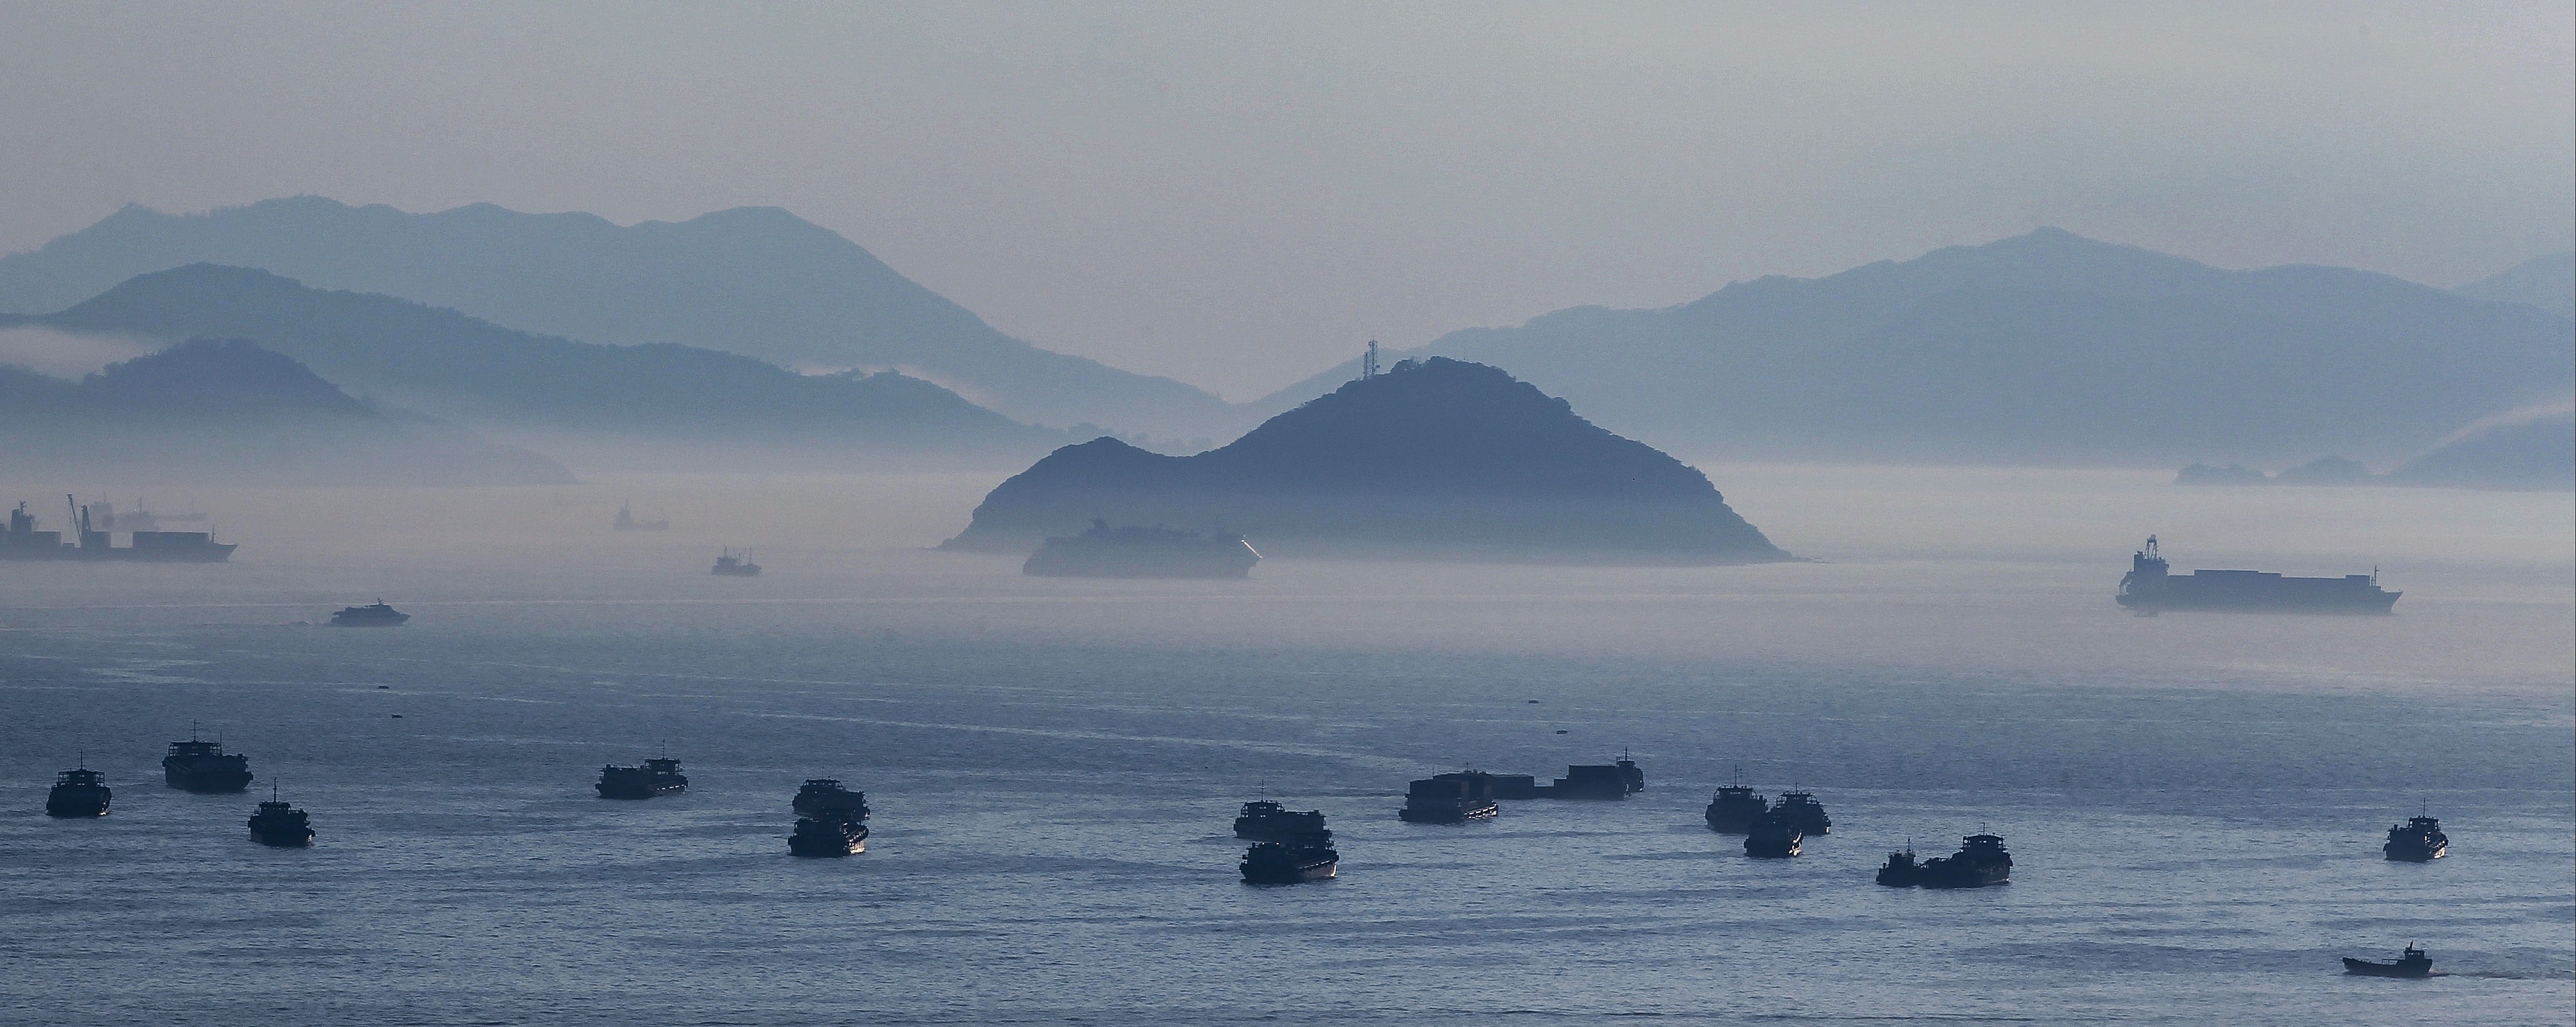 Fog surrounds Lantau Island in the distance as seen from Tai Kok Tsui. Our Hong Kong Foundation has proposed the reclamation of an artificial island to the east of Lantau Island to address Hong Kong’s housing and development needs. Photo: Roy Issa